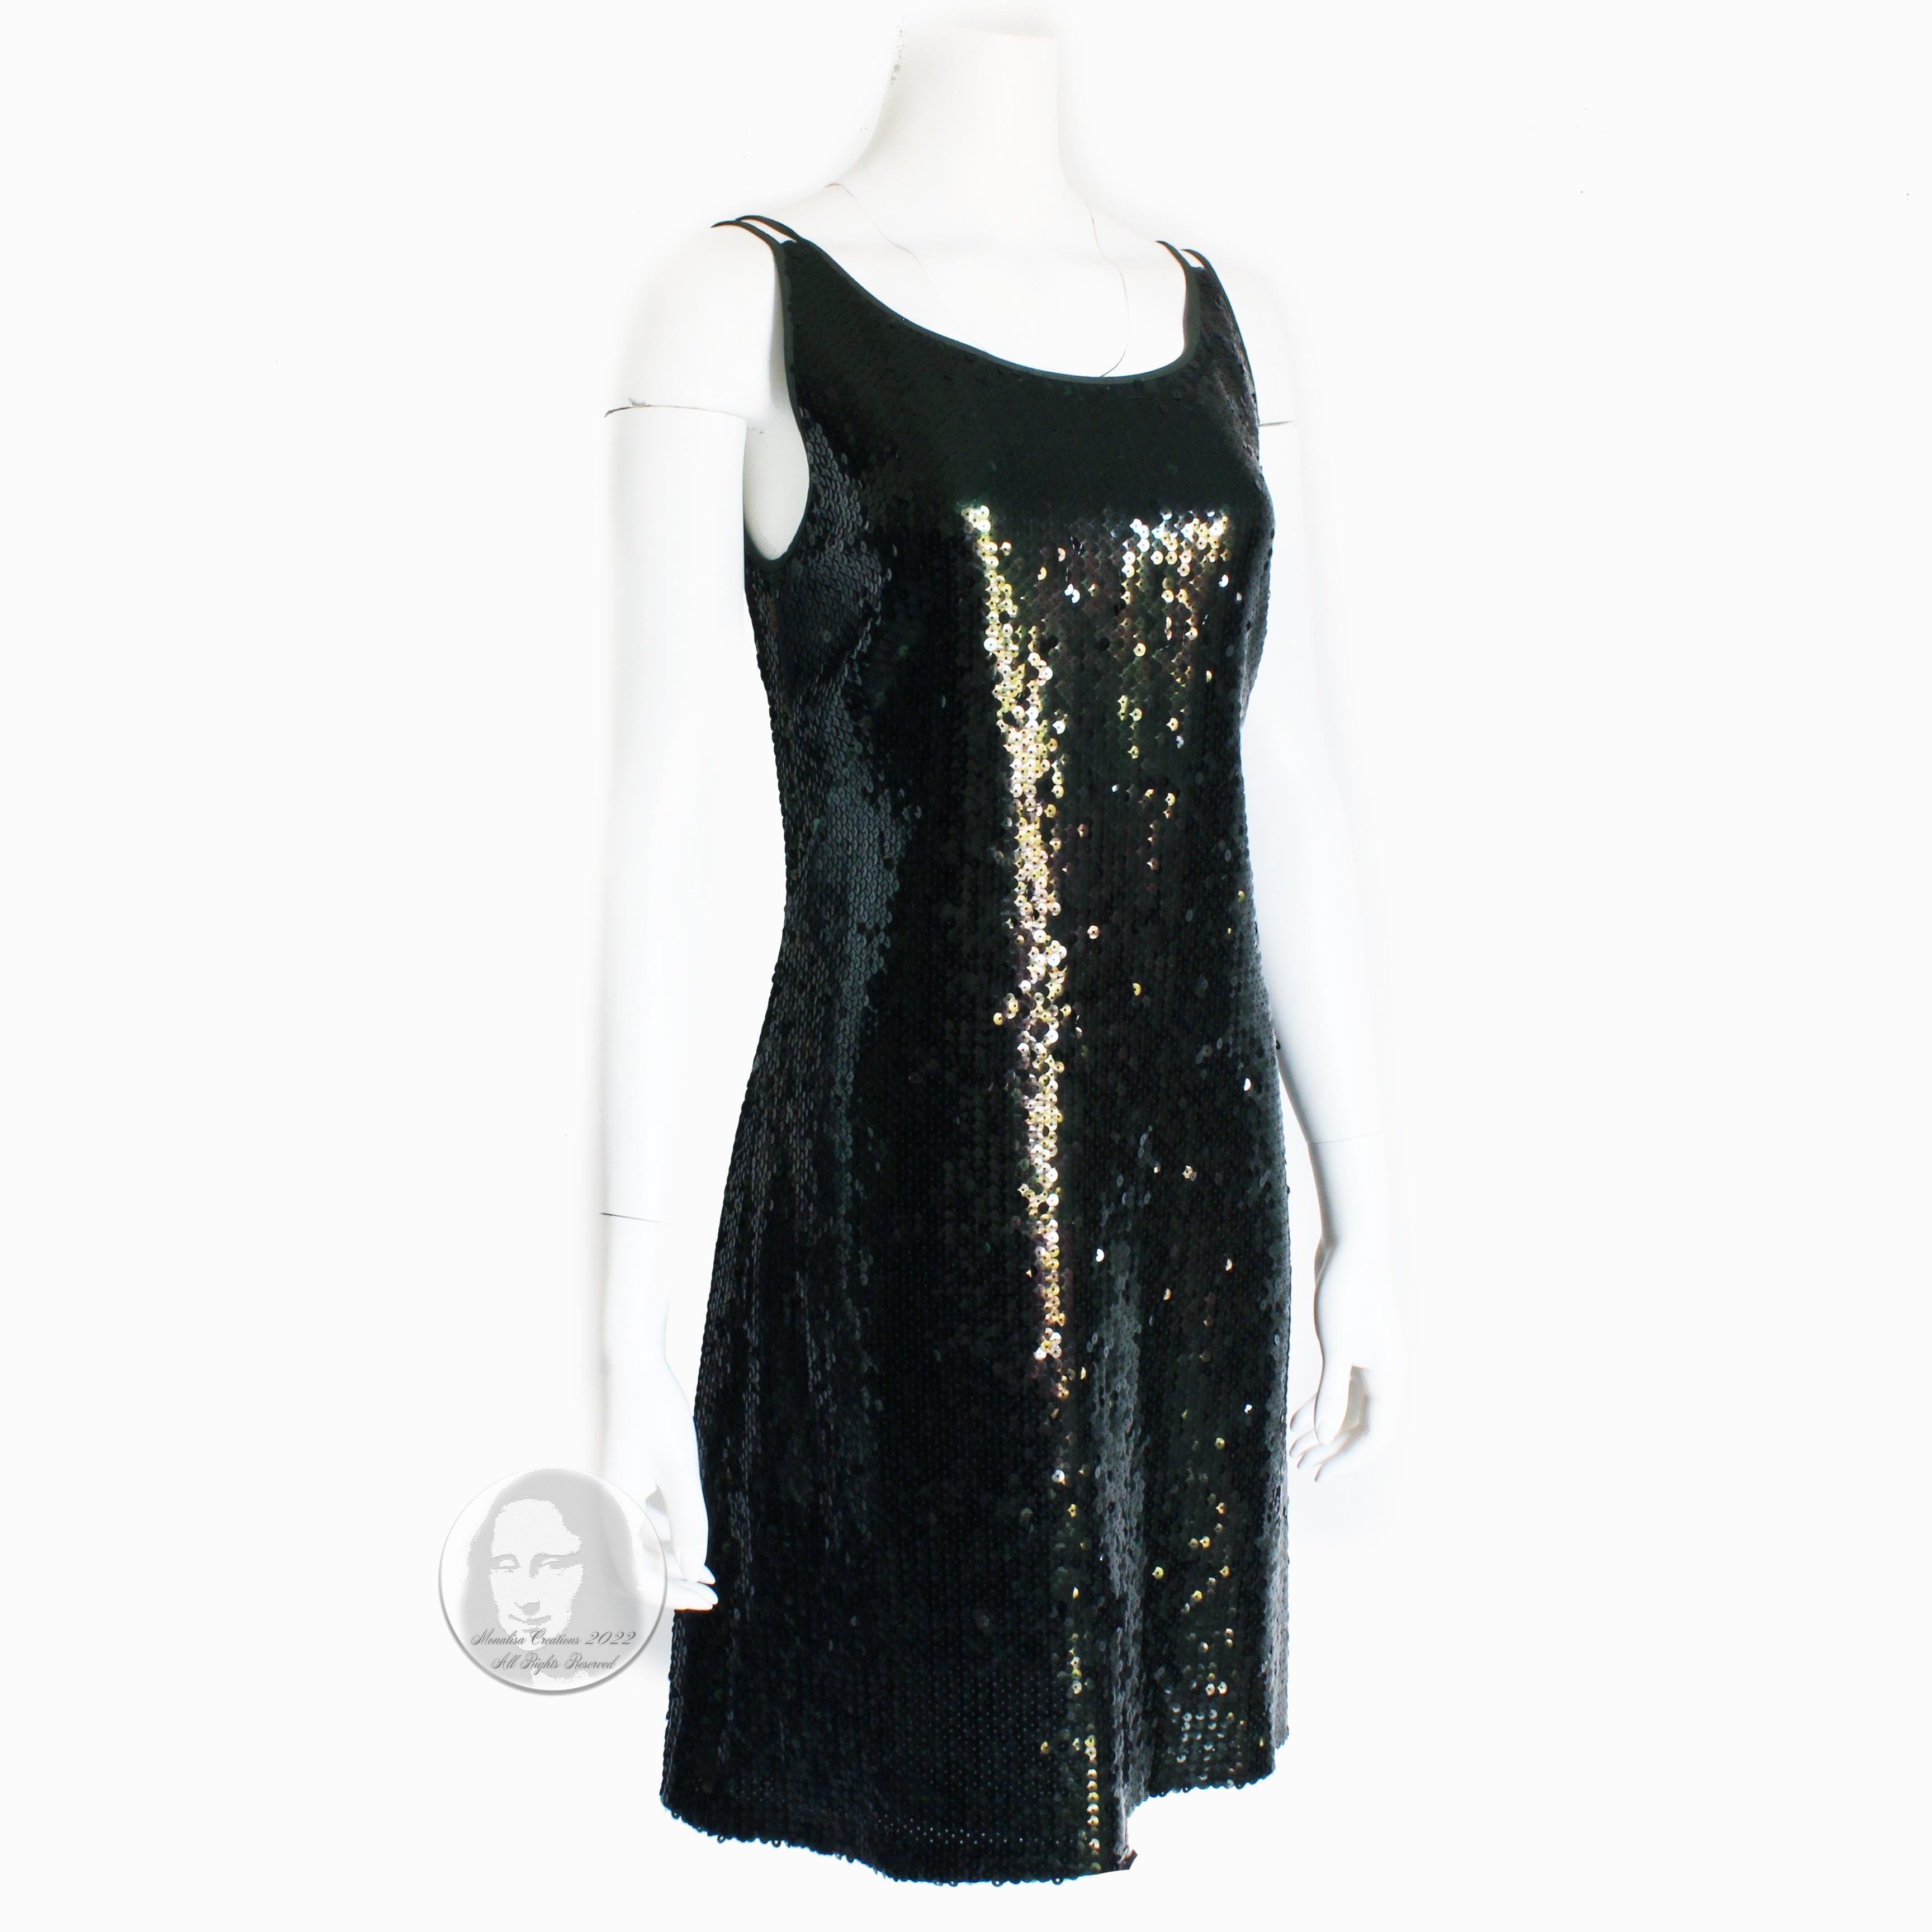 Sparkling Rena Lange cocktail dress, likely made in the 90s.  Made from moss green silk crepe, it's covered in deep green sequins throughout and features a chic low cut back.  Quality made, it's the perfect party or formal event dress. 